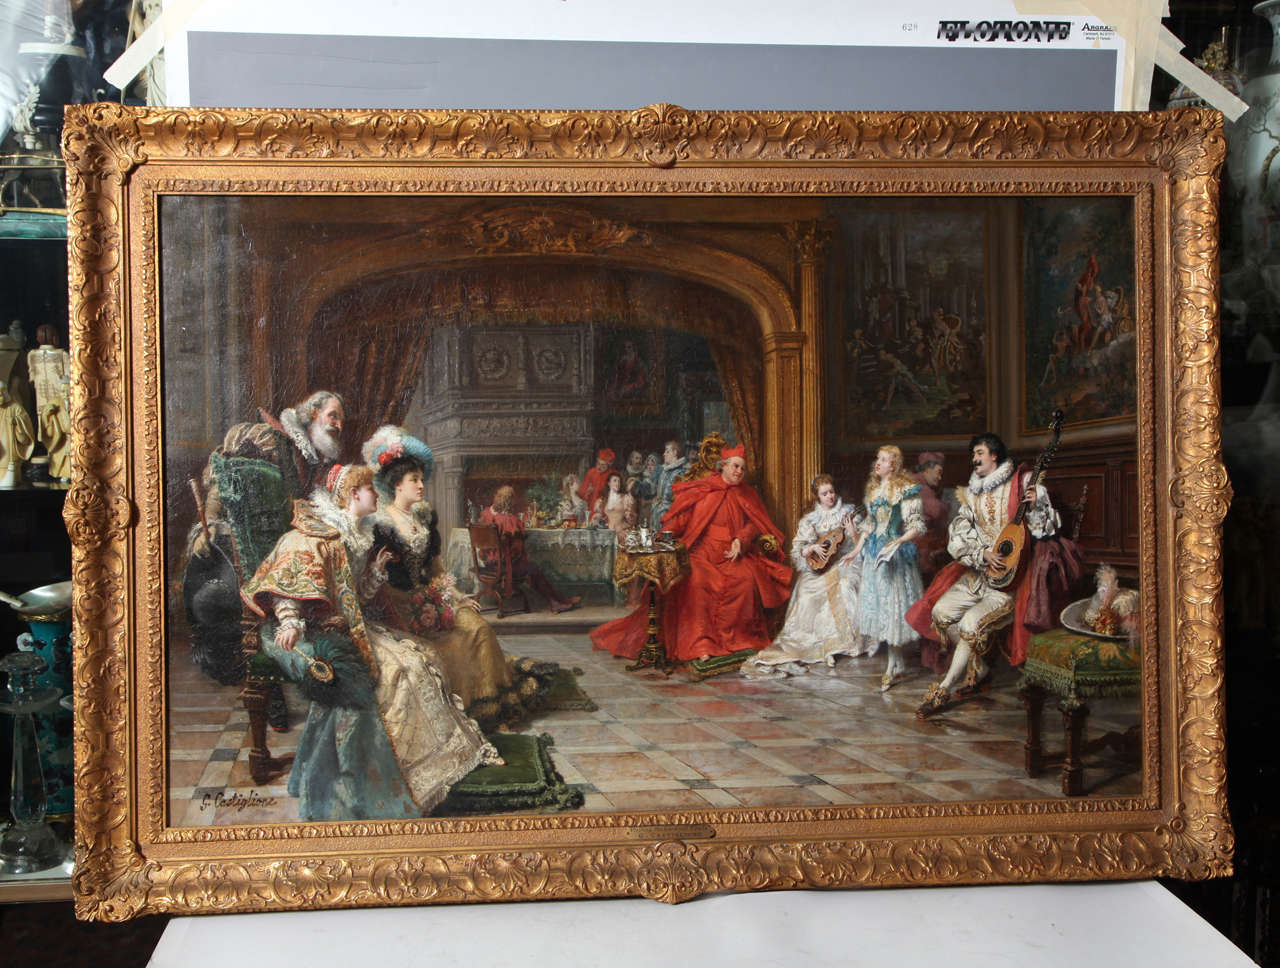 An exquisite framed oil on canvas 'The Cardinal's Court', a masterpiece by important 19th century. Genre and portrait painter Giuseppe Castiglione (1829-1908) who was celebrated in Paris salons and known for his emphasis on color and perspective.